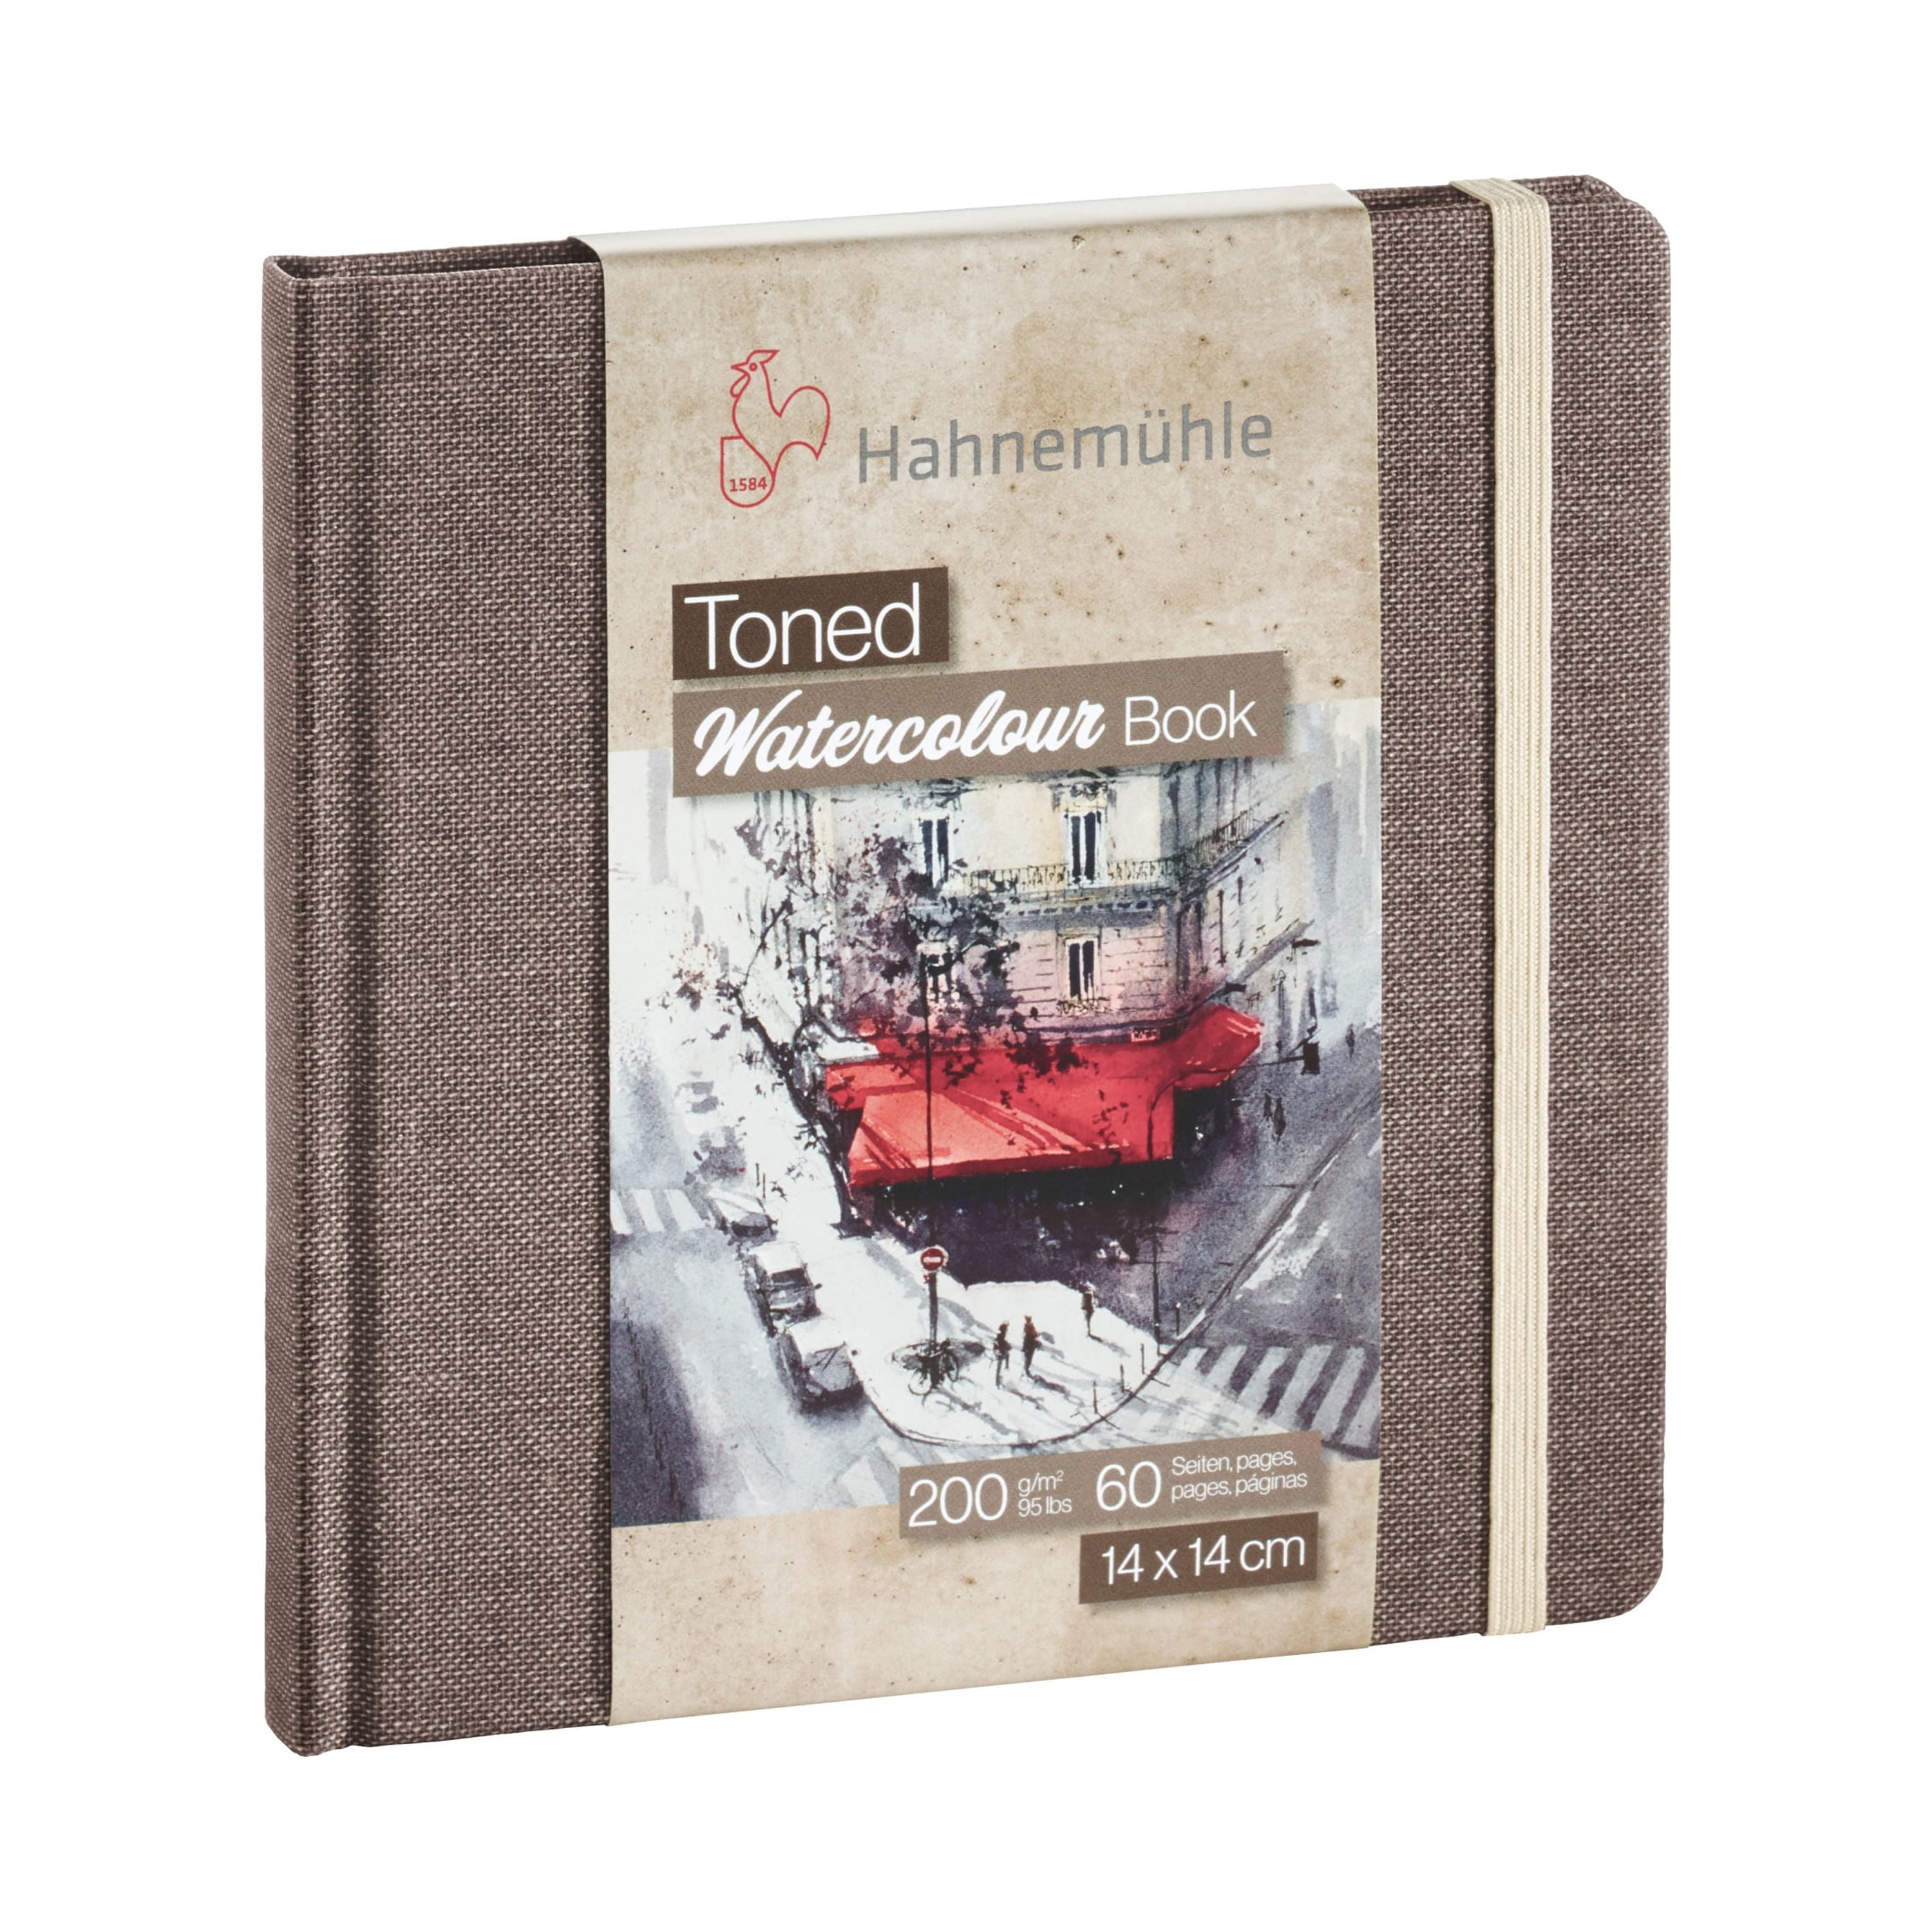 Hahnemühle Toned Watercolor Book, Tan Square (5.5 x 5.5)